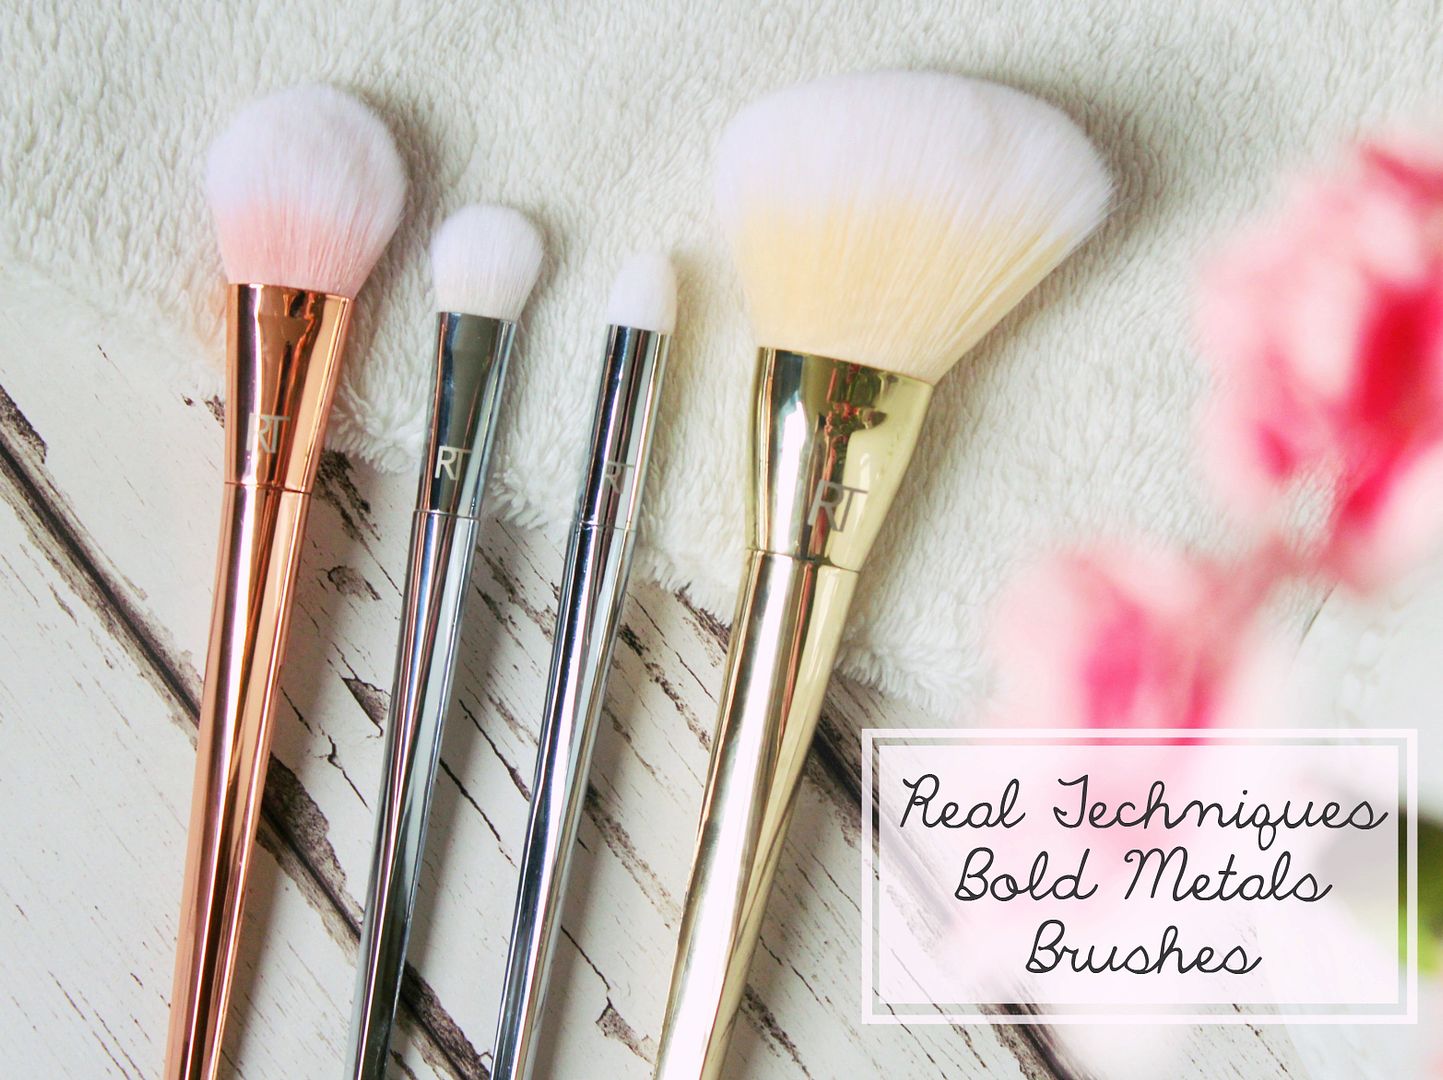 Real Techniques Bold Metals Brush Collection Review Belle-Amie UK Beauty Fashion Lifestyle Blog